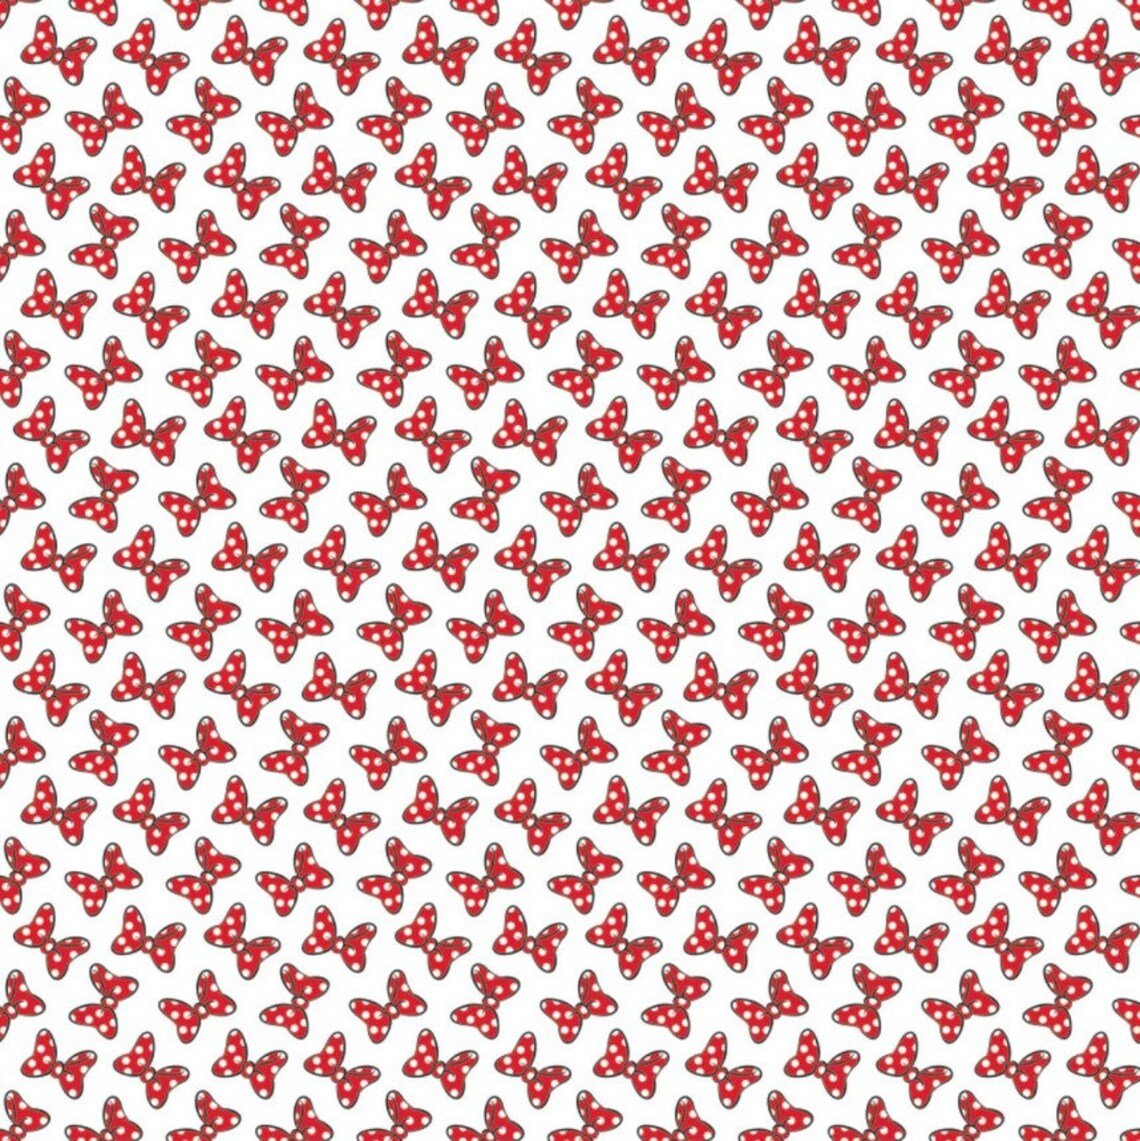 Disney Minnie Mouse Bows, Minnie Mouse Dot Couture | Fabric Design Treasures